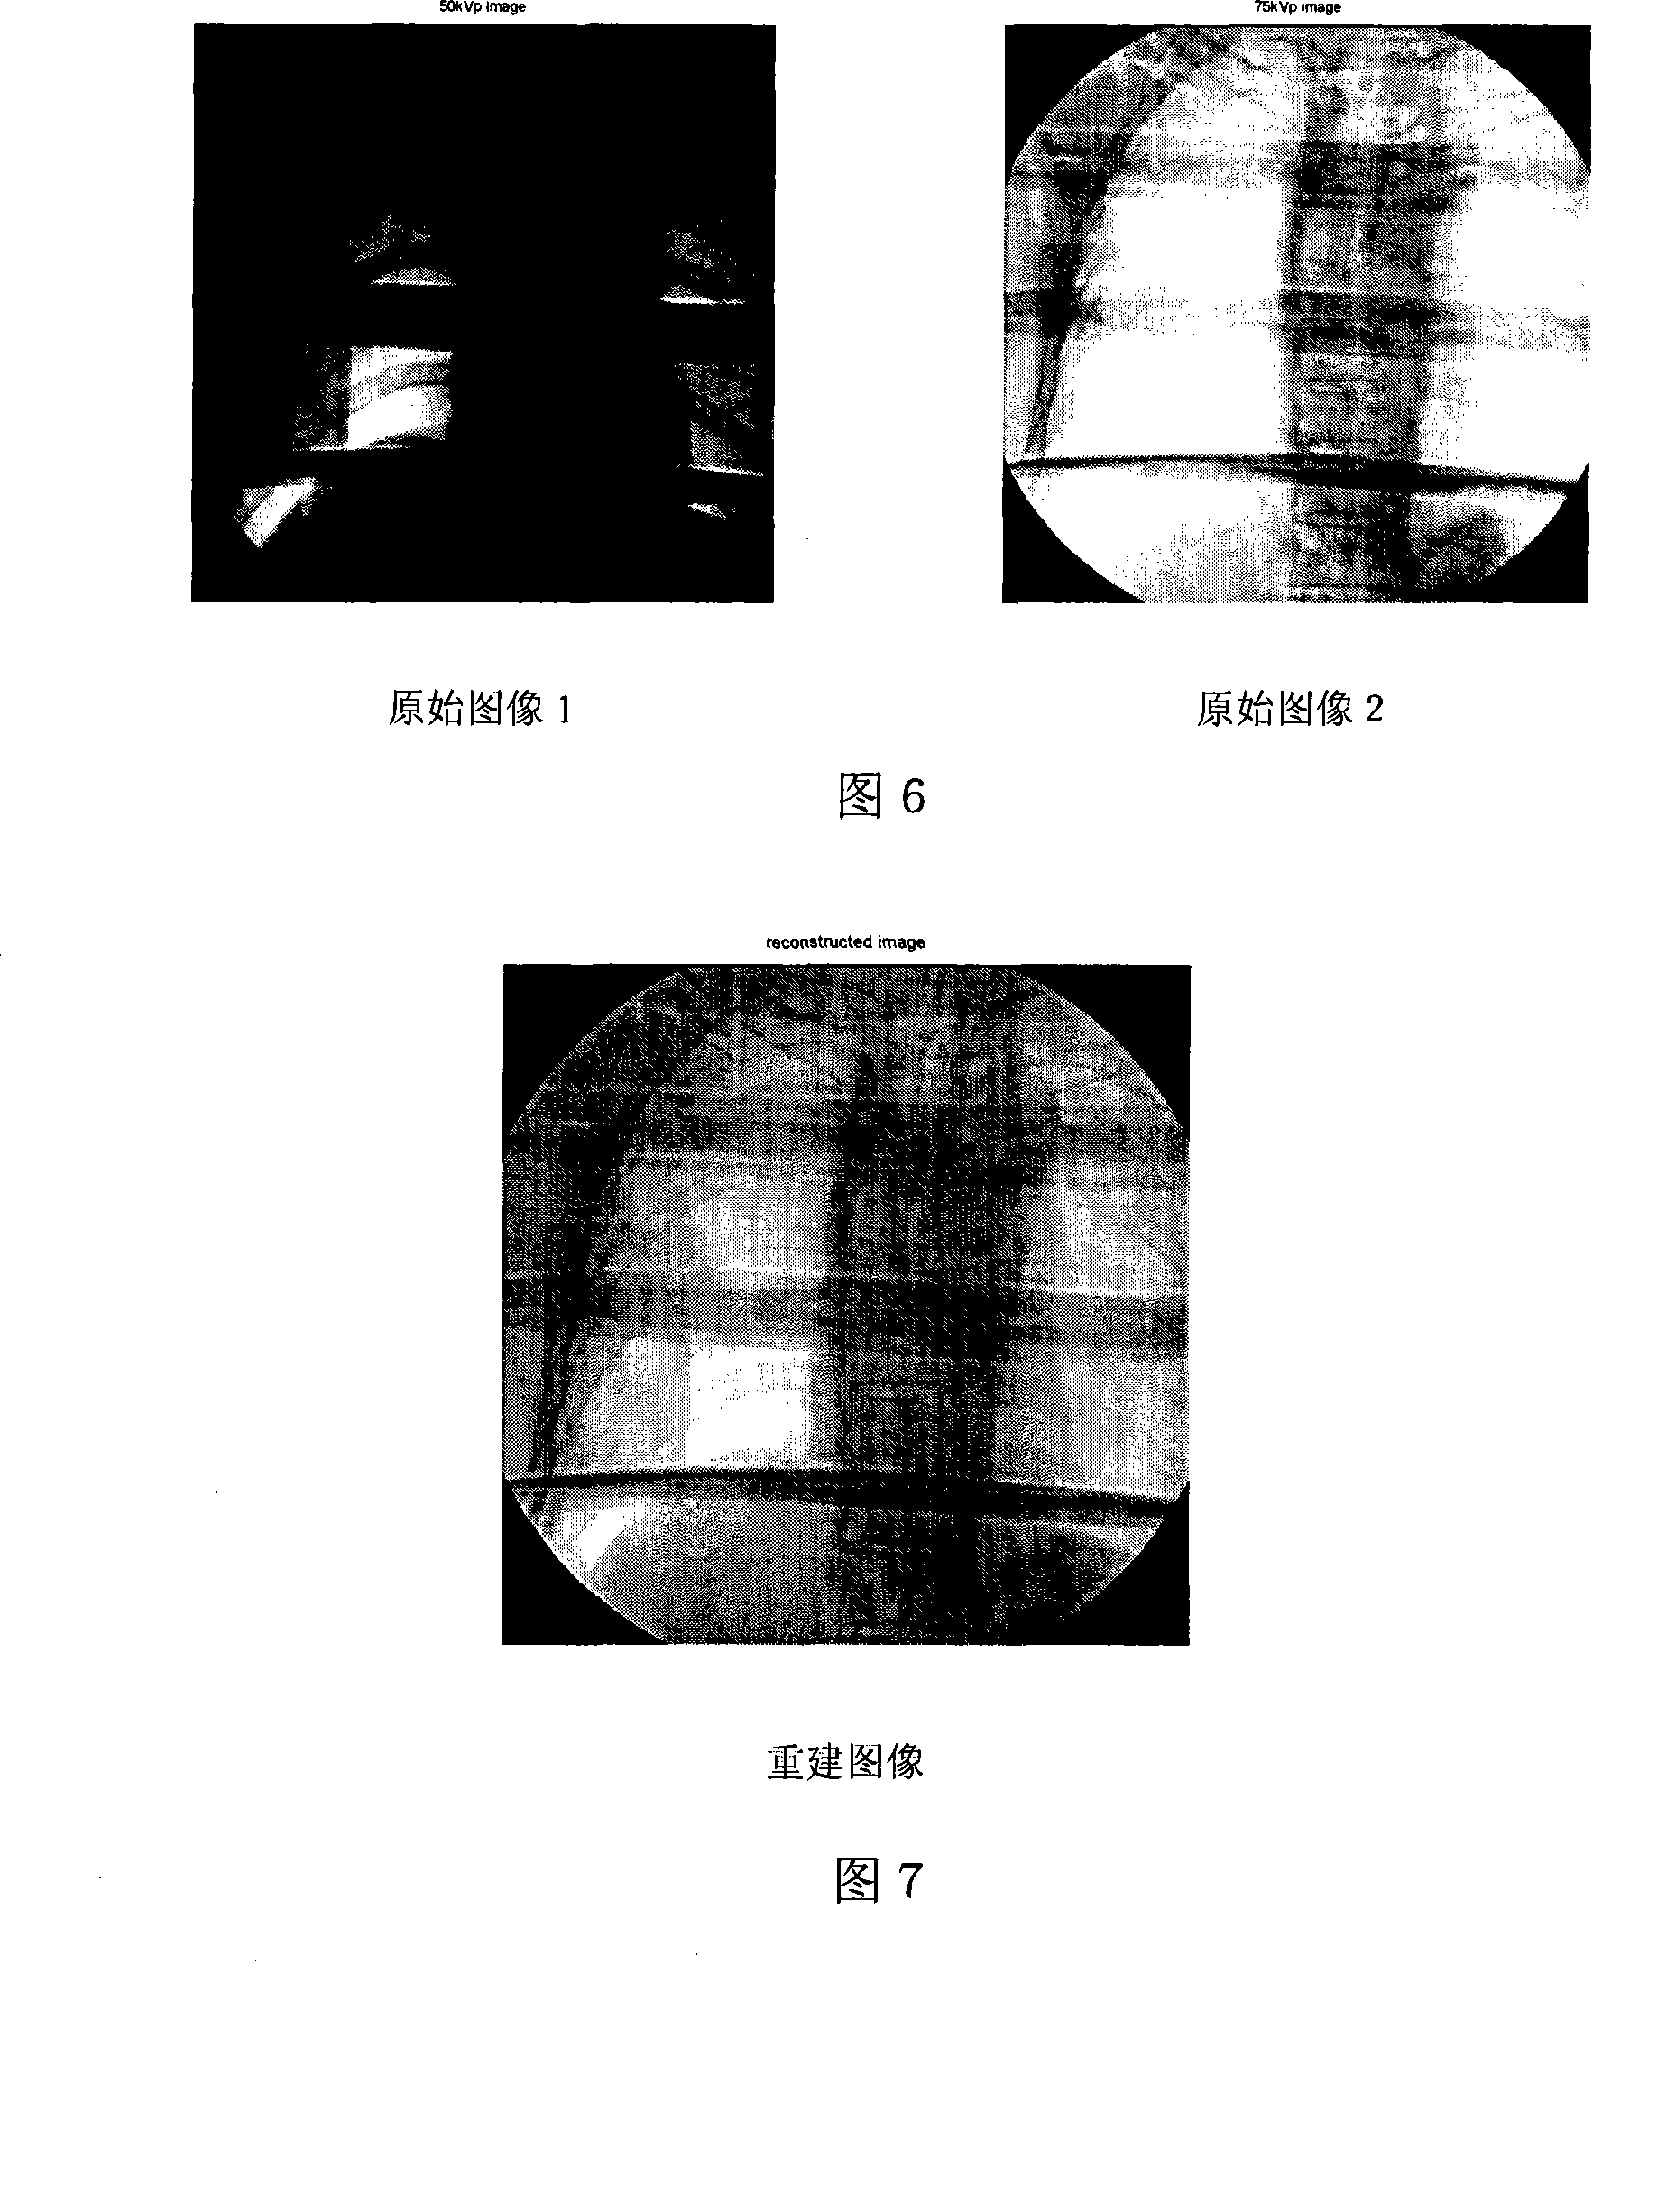 High dynamic range regenerating method of X-ray image based on scale space decomposition